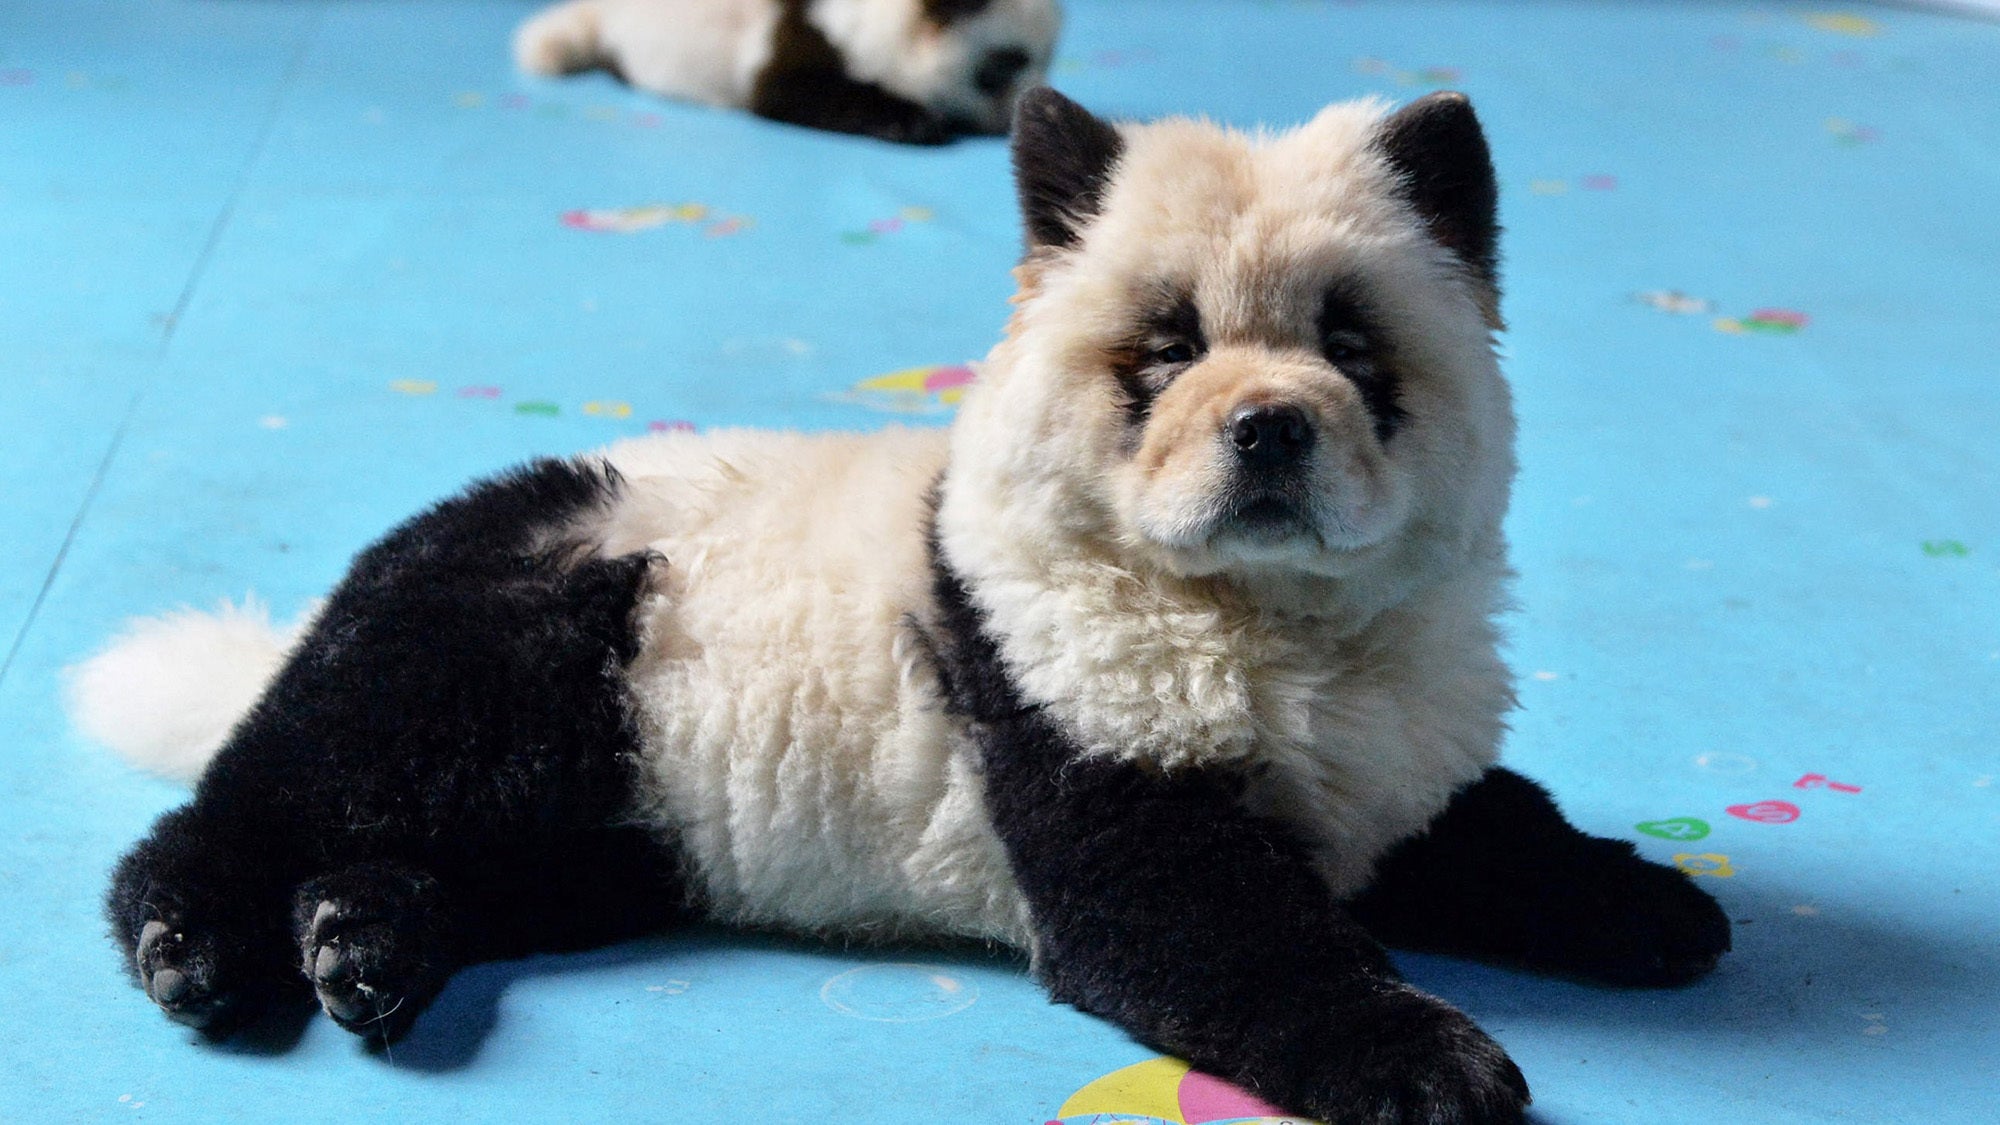 Chinese zoo paints dogs to look like baby pandas